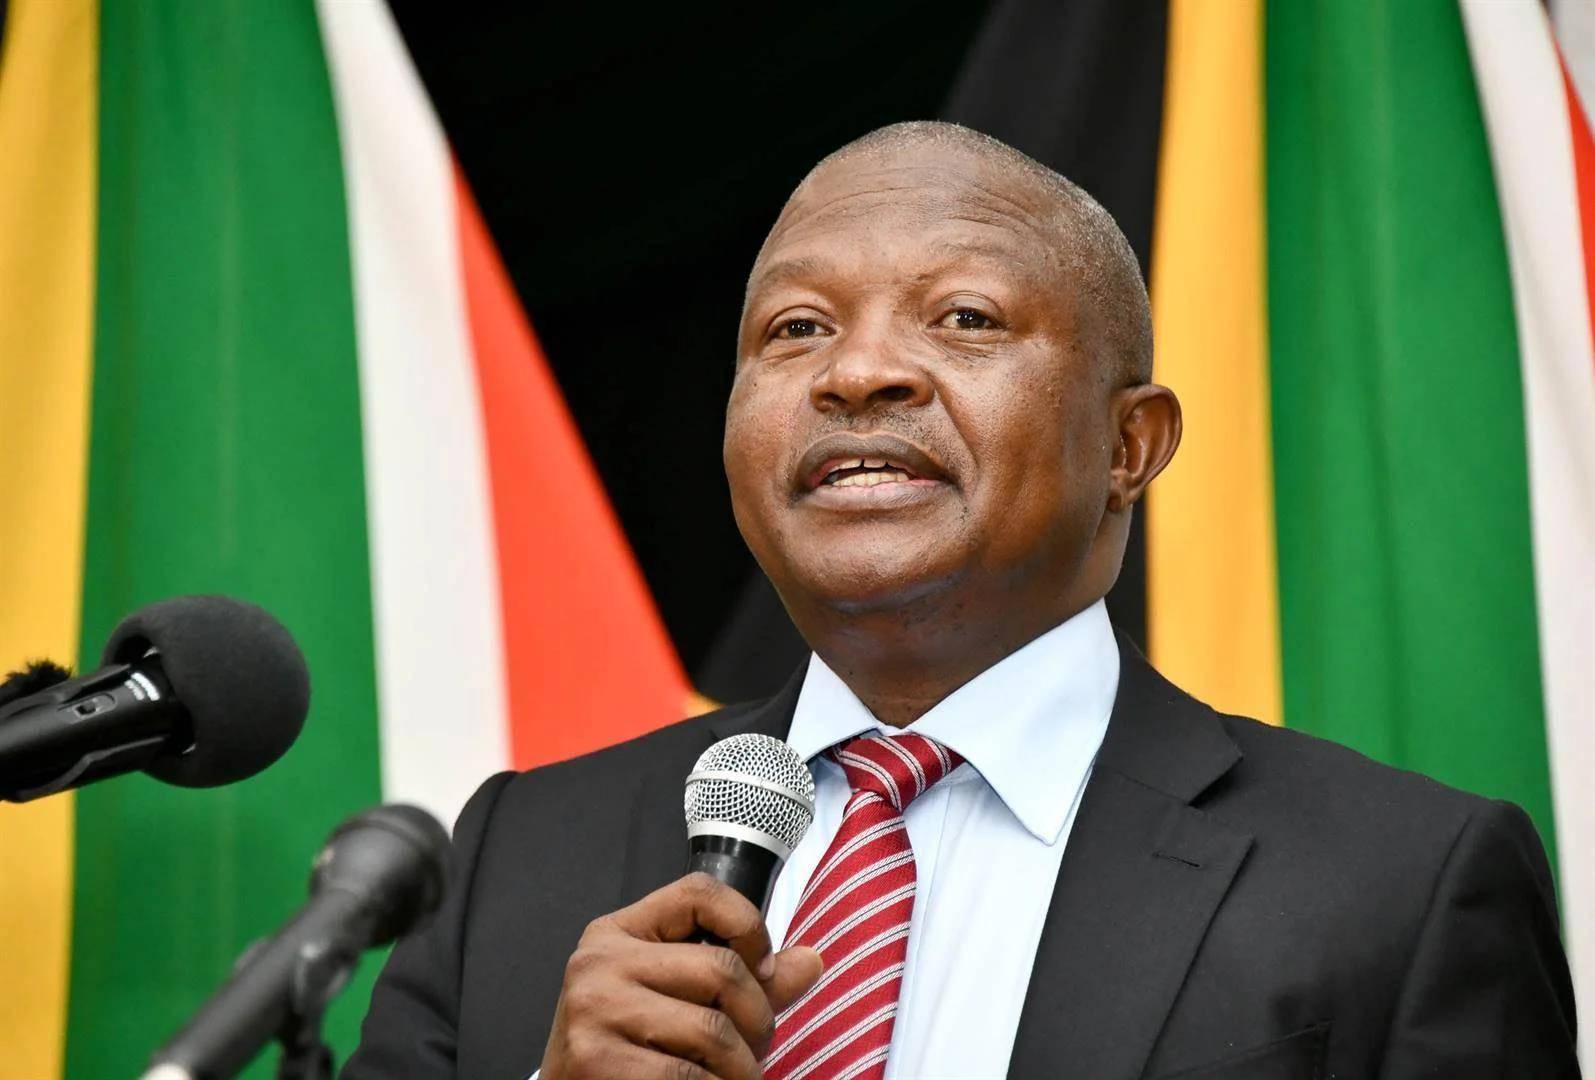 News24 | 'Speculations and insinuations': Former deputy president DD Mabuza denies joining Zuma's MK Party